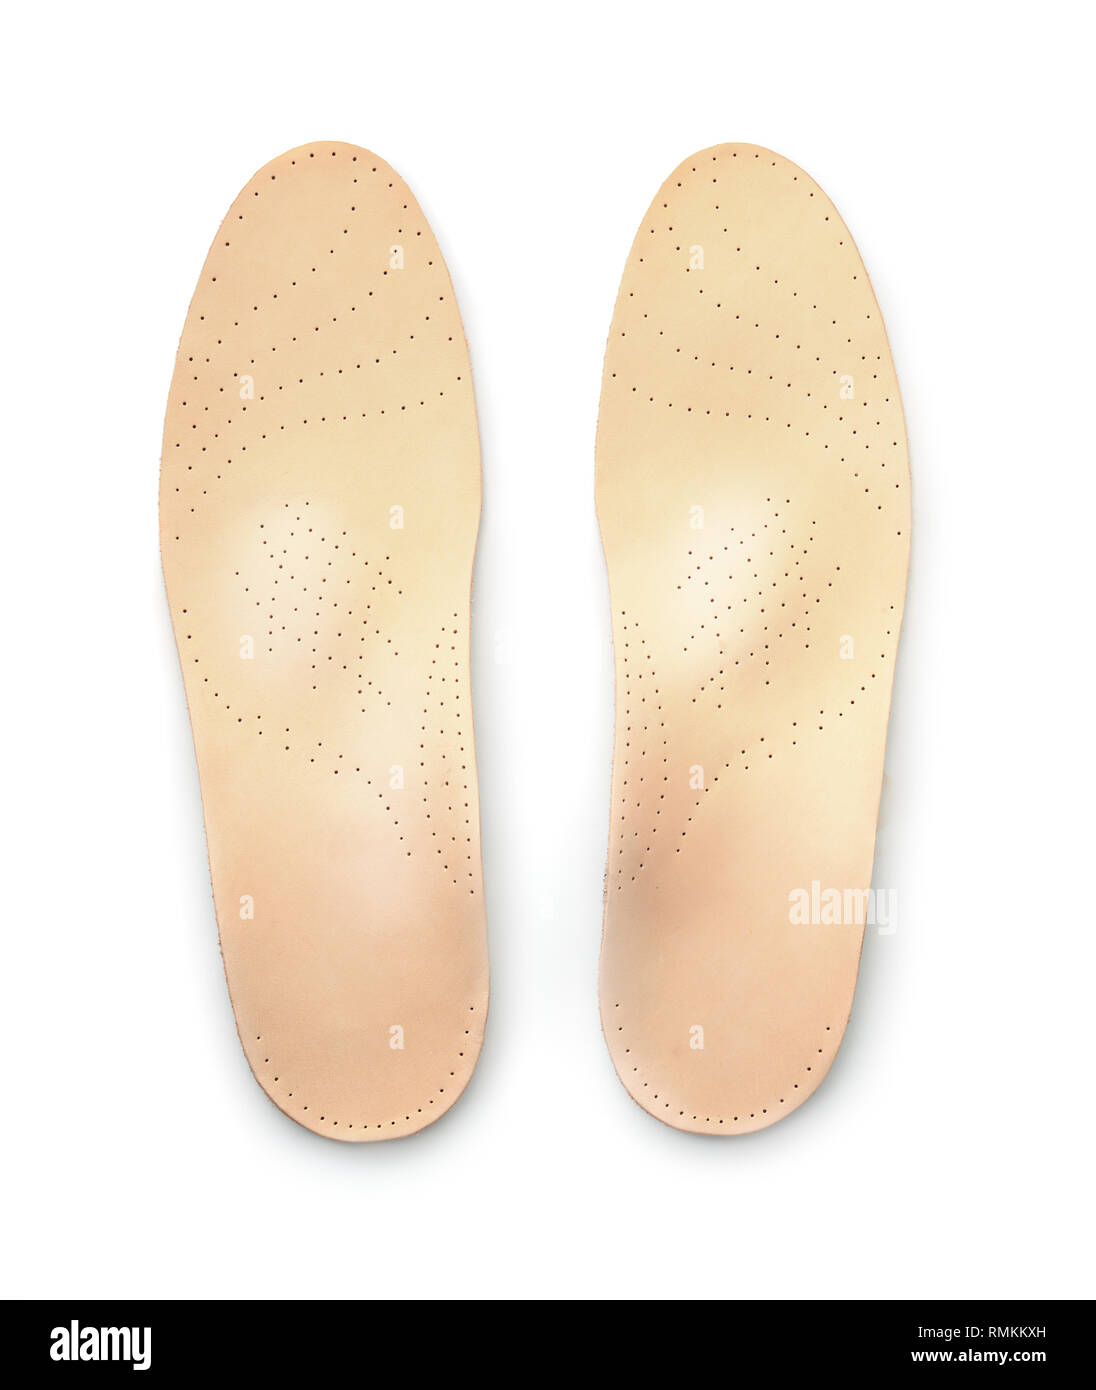 Top view of leather orthopedic insoles isolated on white Stock Photo